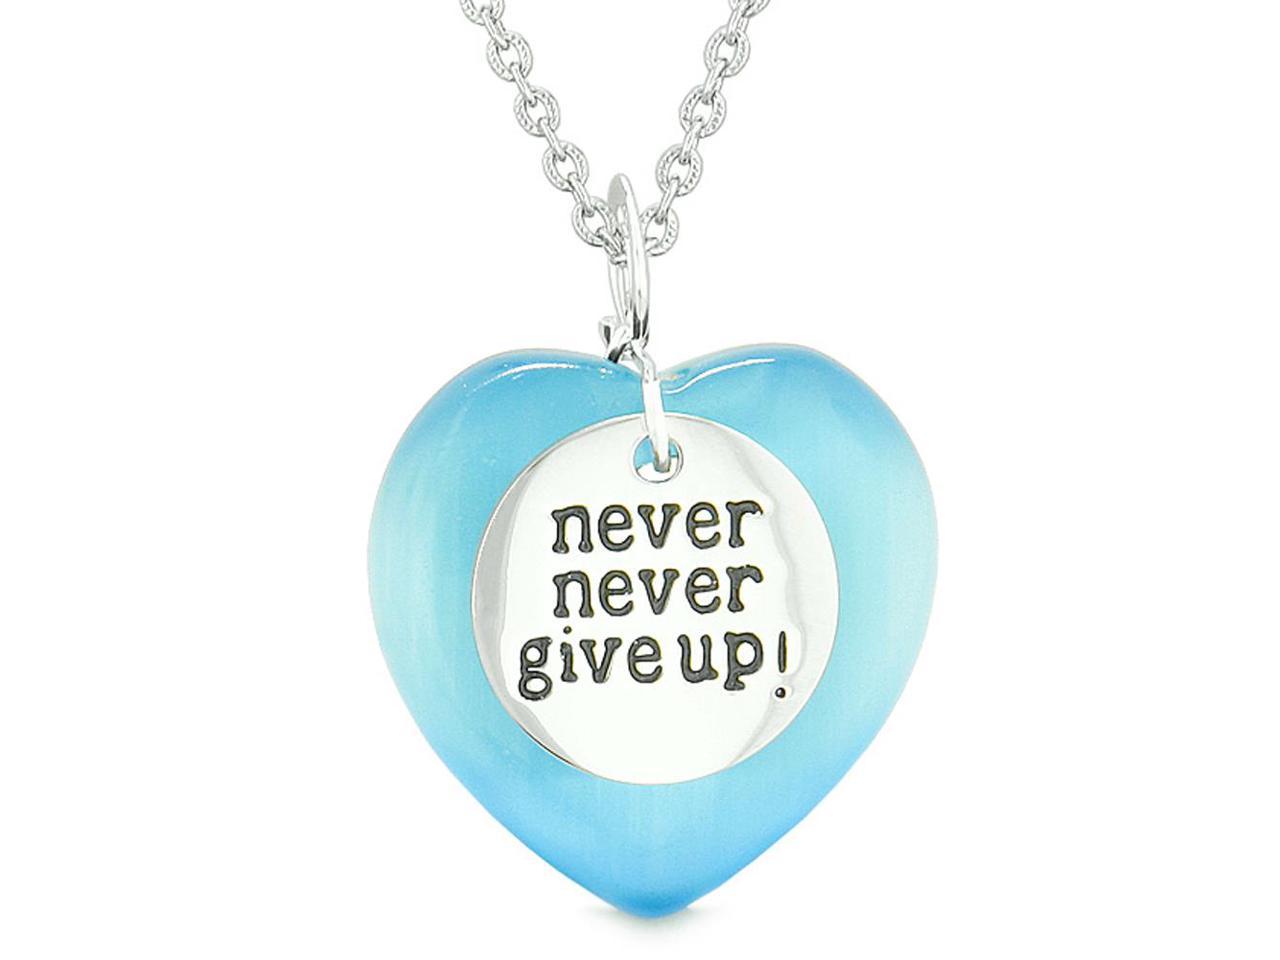 Never Give Up Amulets Love Couples or Best Friends Yin Yang White Quartz Black Agate Tag Necklaces 